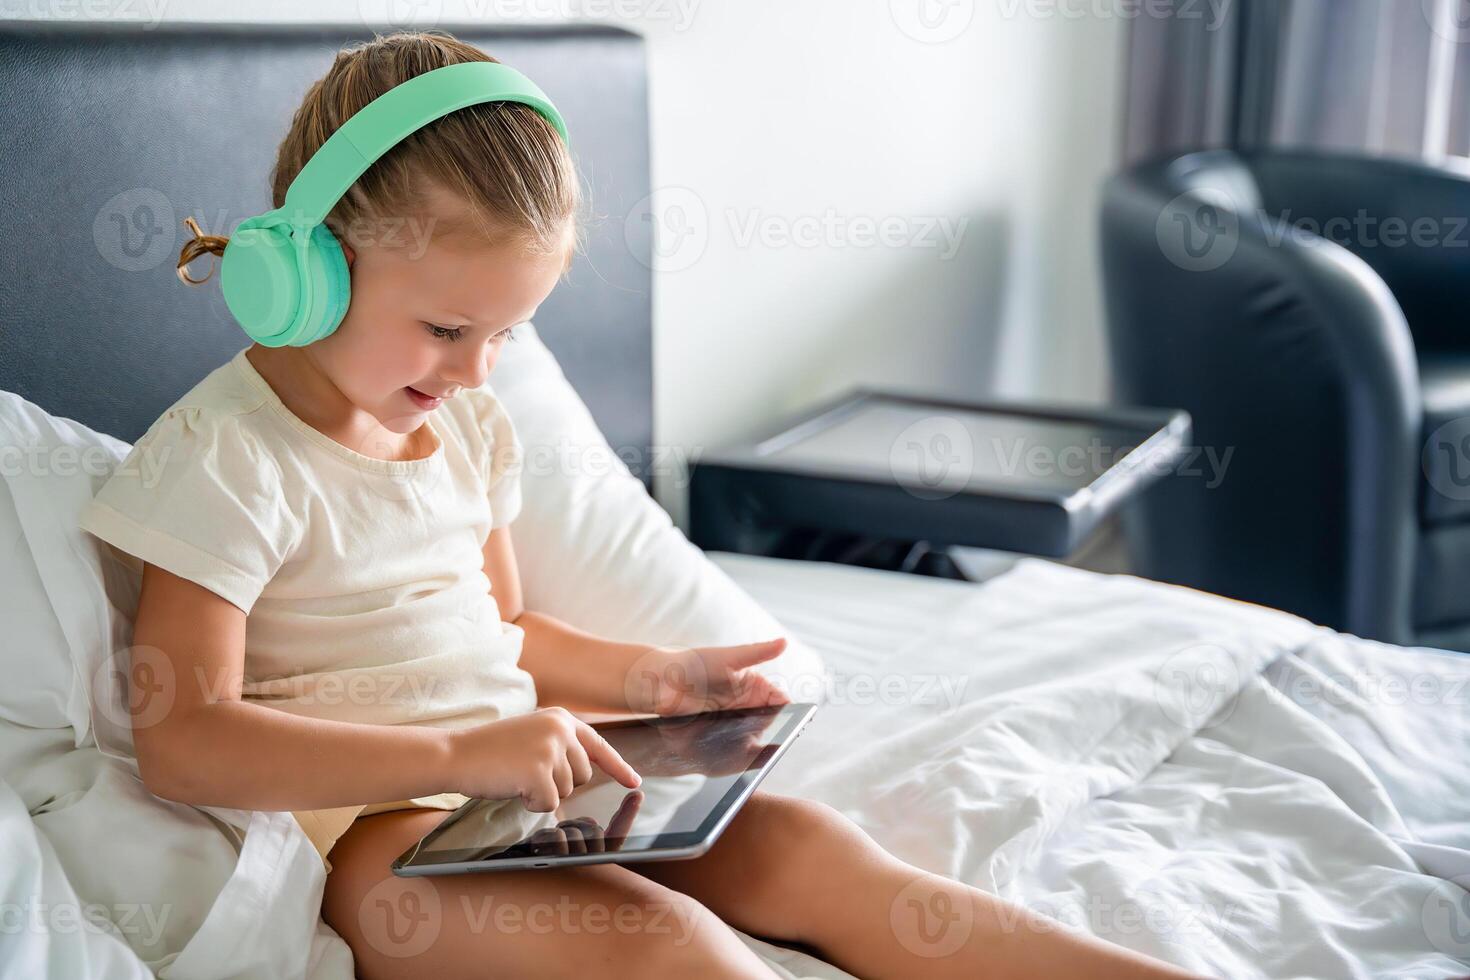 Cute little girl in headphones using digital tablet and smiling happy while listening to music or playing game in home bed. High quality photo